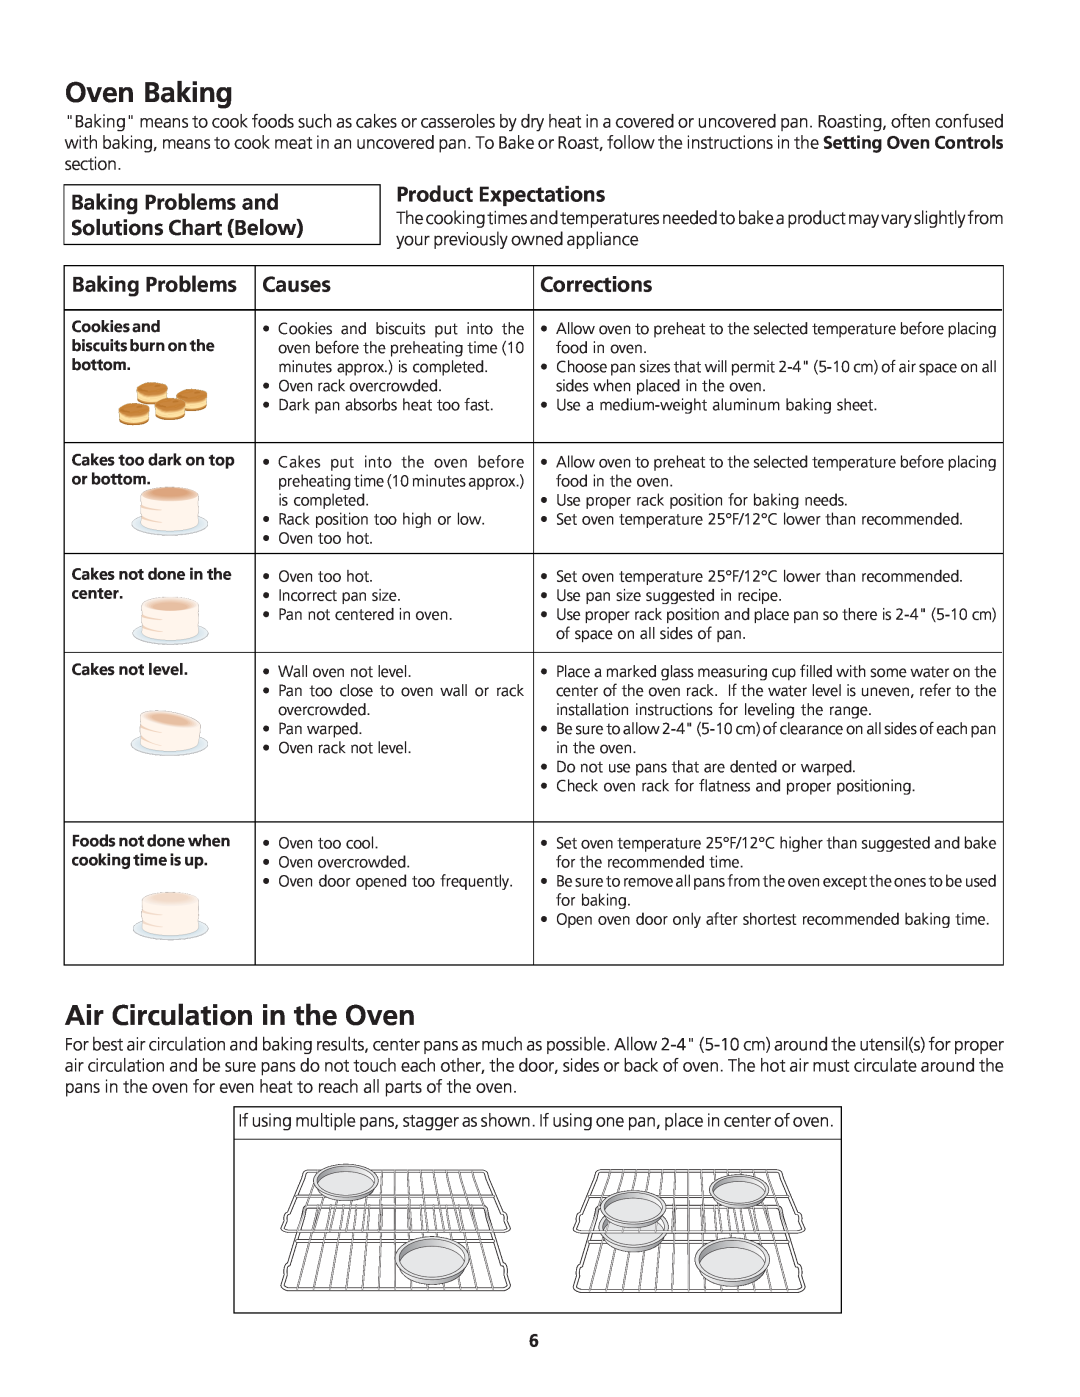 Frigidaire FGB24S5AB Oven Baking, Air Circulation in the Oven, Baking Problems and Solutions Chart Below, Causes 